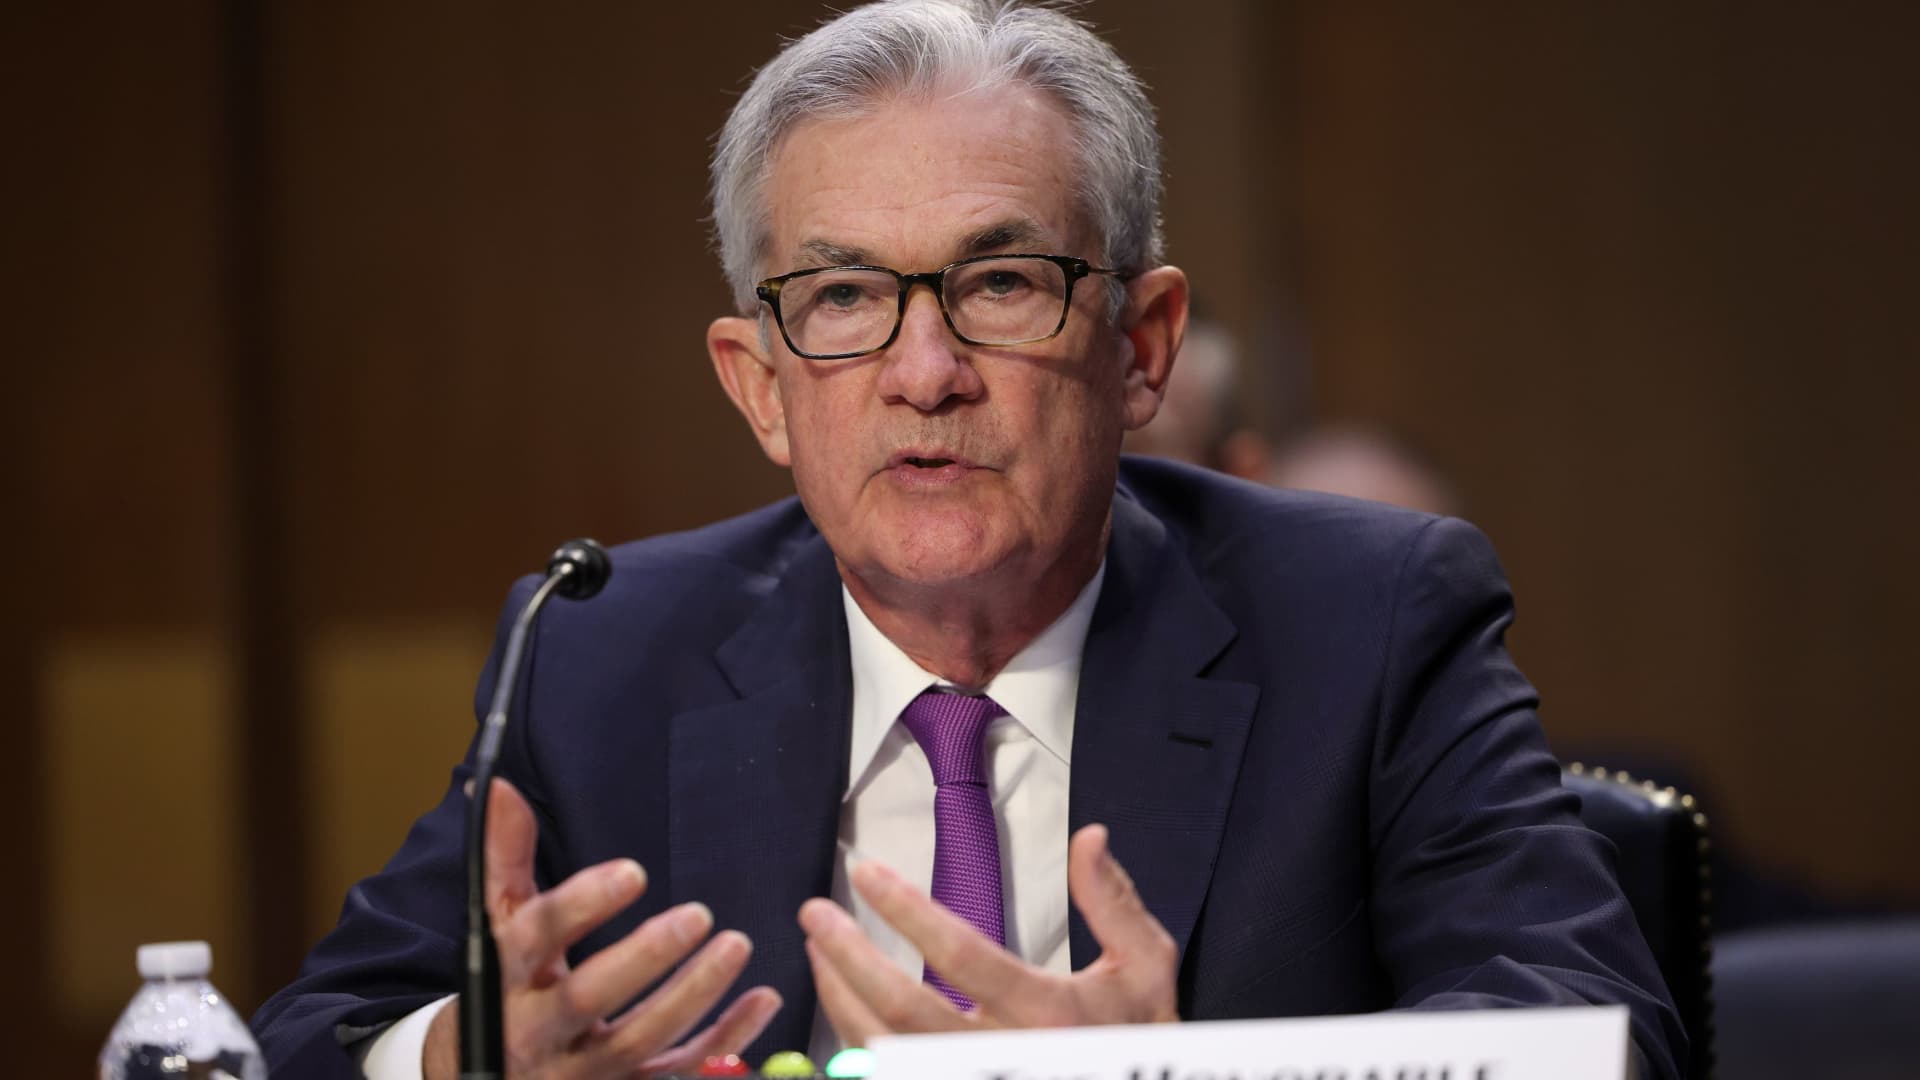 Federal Reserve Chairman Jerome Powell testifies during a Senate Banking, Housing and Urban Affairs Committee hearing on the CARES Act, at the Hart Senate Office Building in Washington, DC, U.S., September 28, 2021.